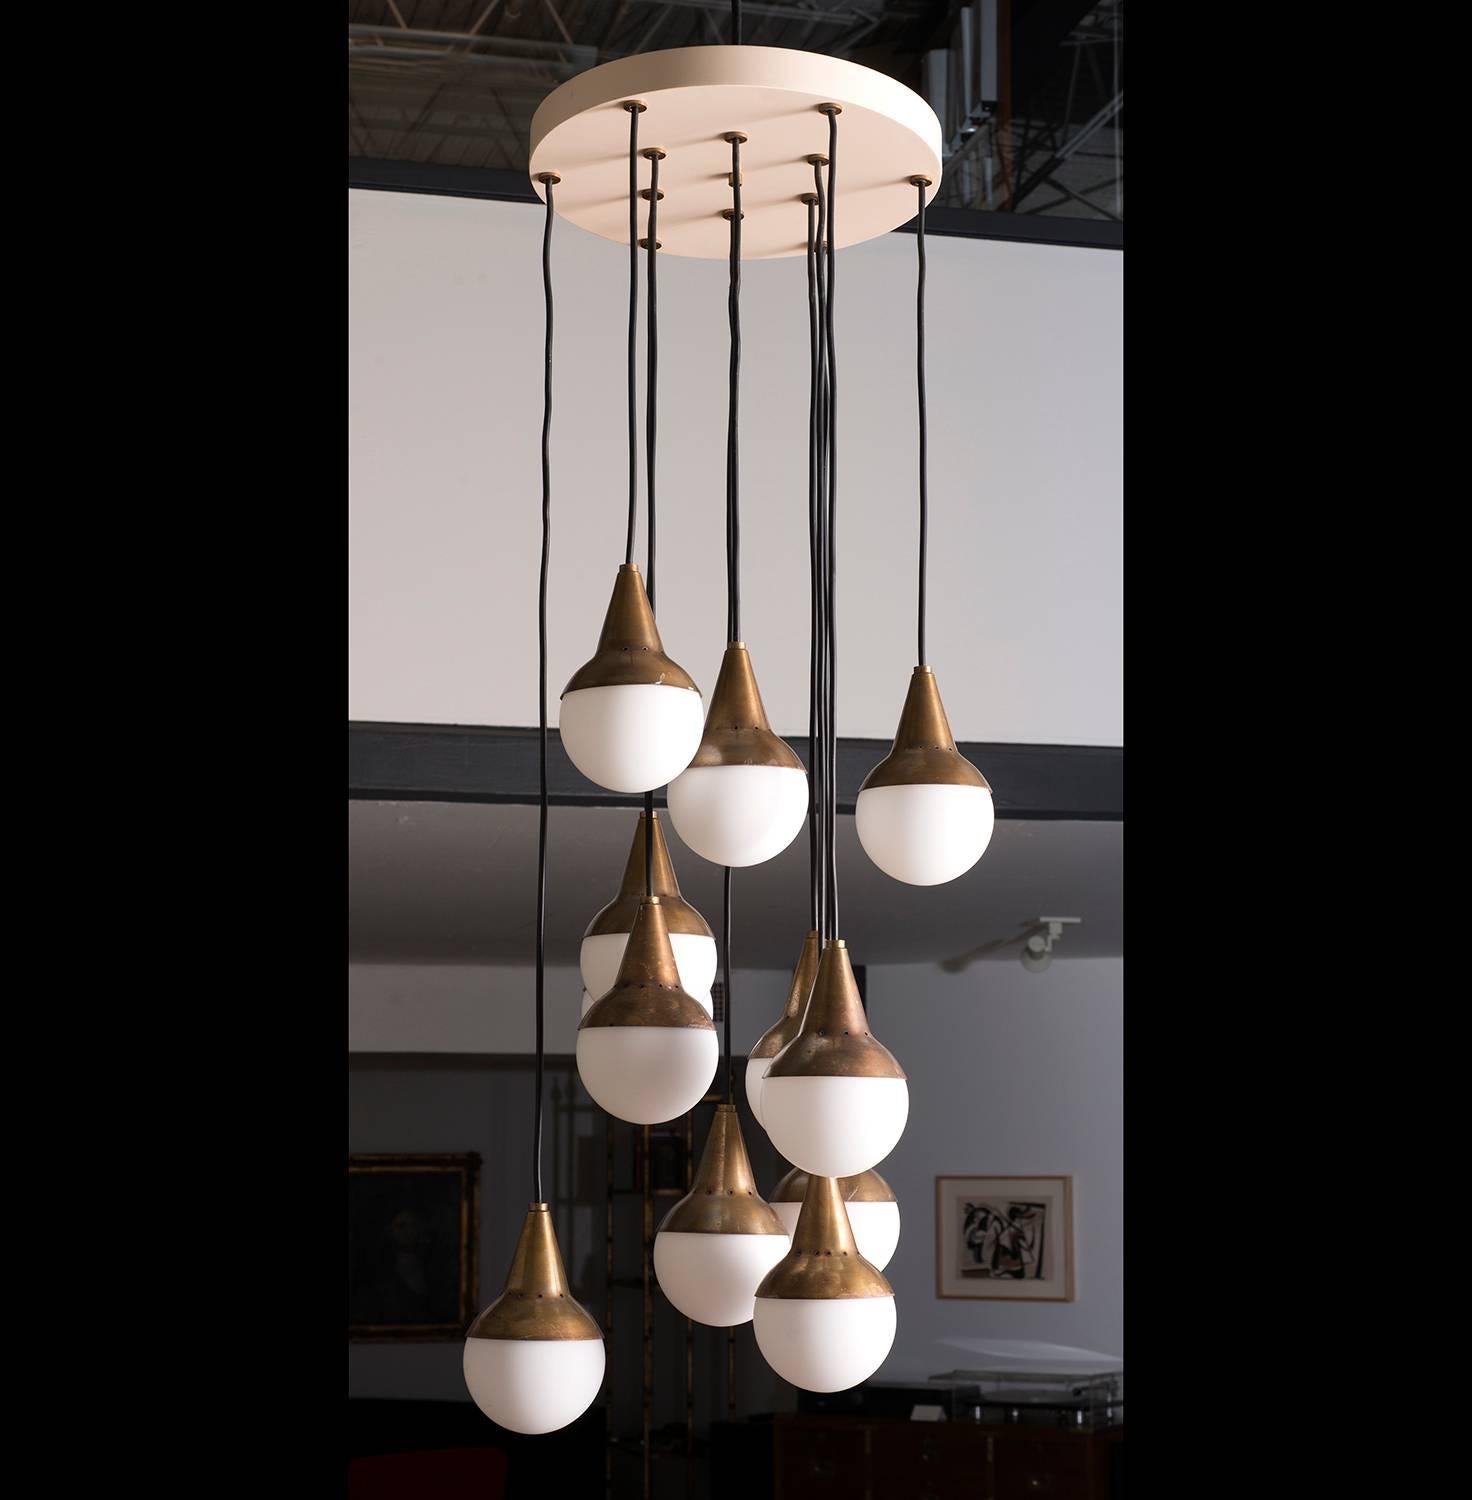 Mid-Century Modern Italian Chandelier with 12 Hanging Opaque Glass Balls and Brass Accents, 1950s